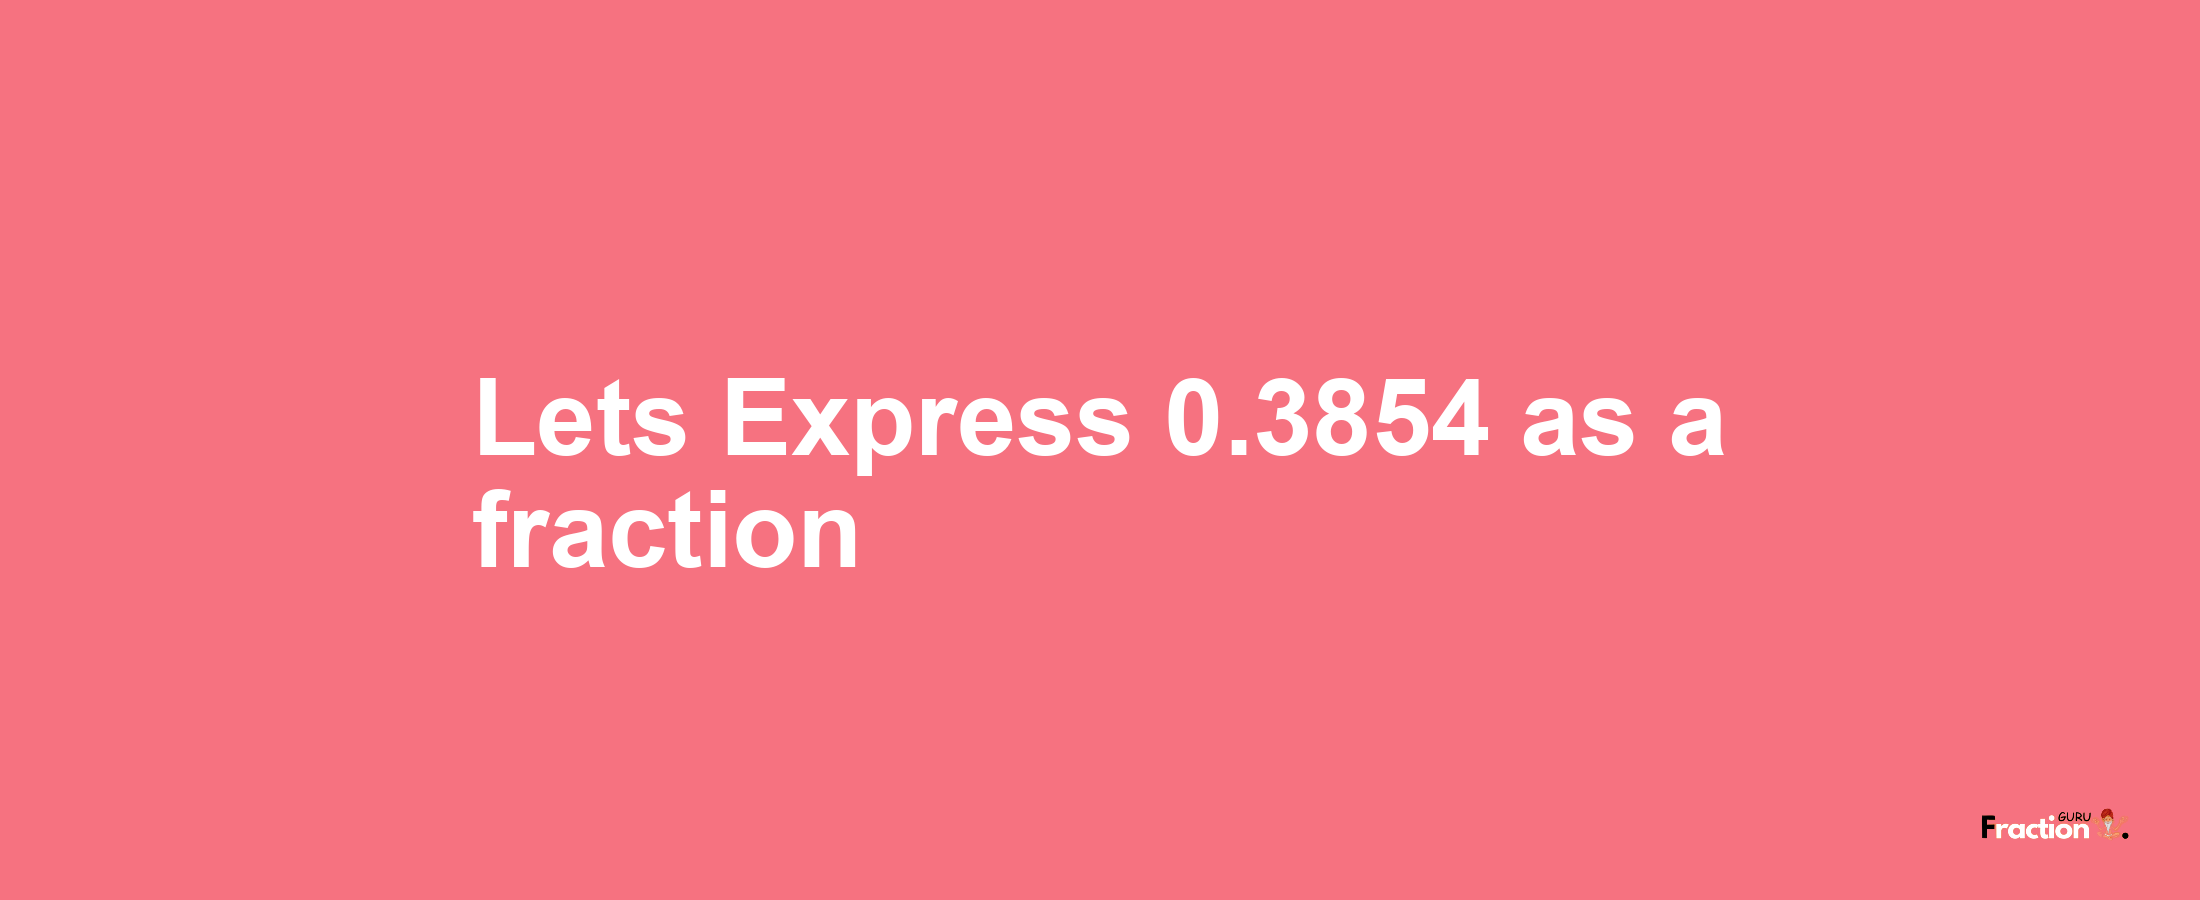 Lets Express 0.3854 as afraction